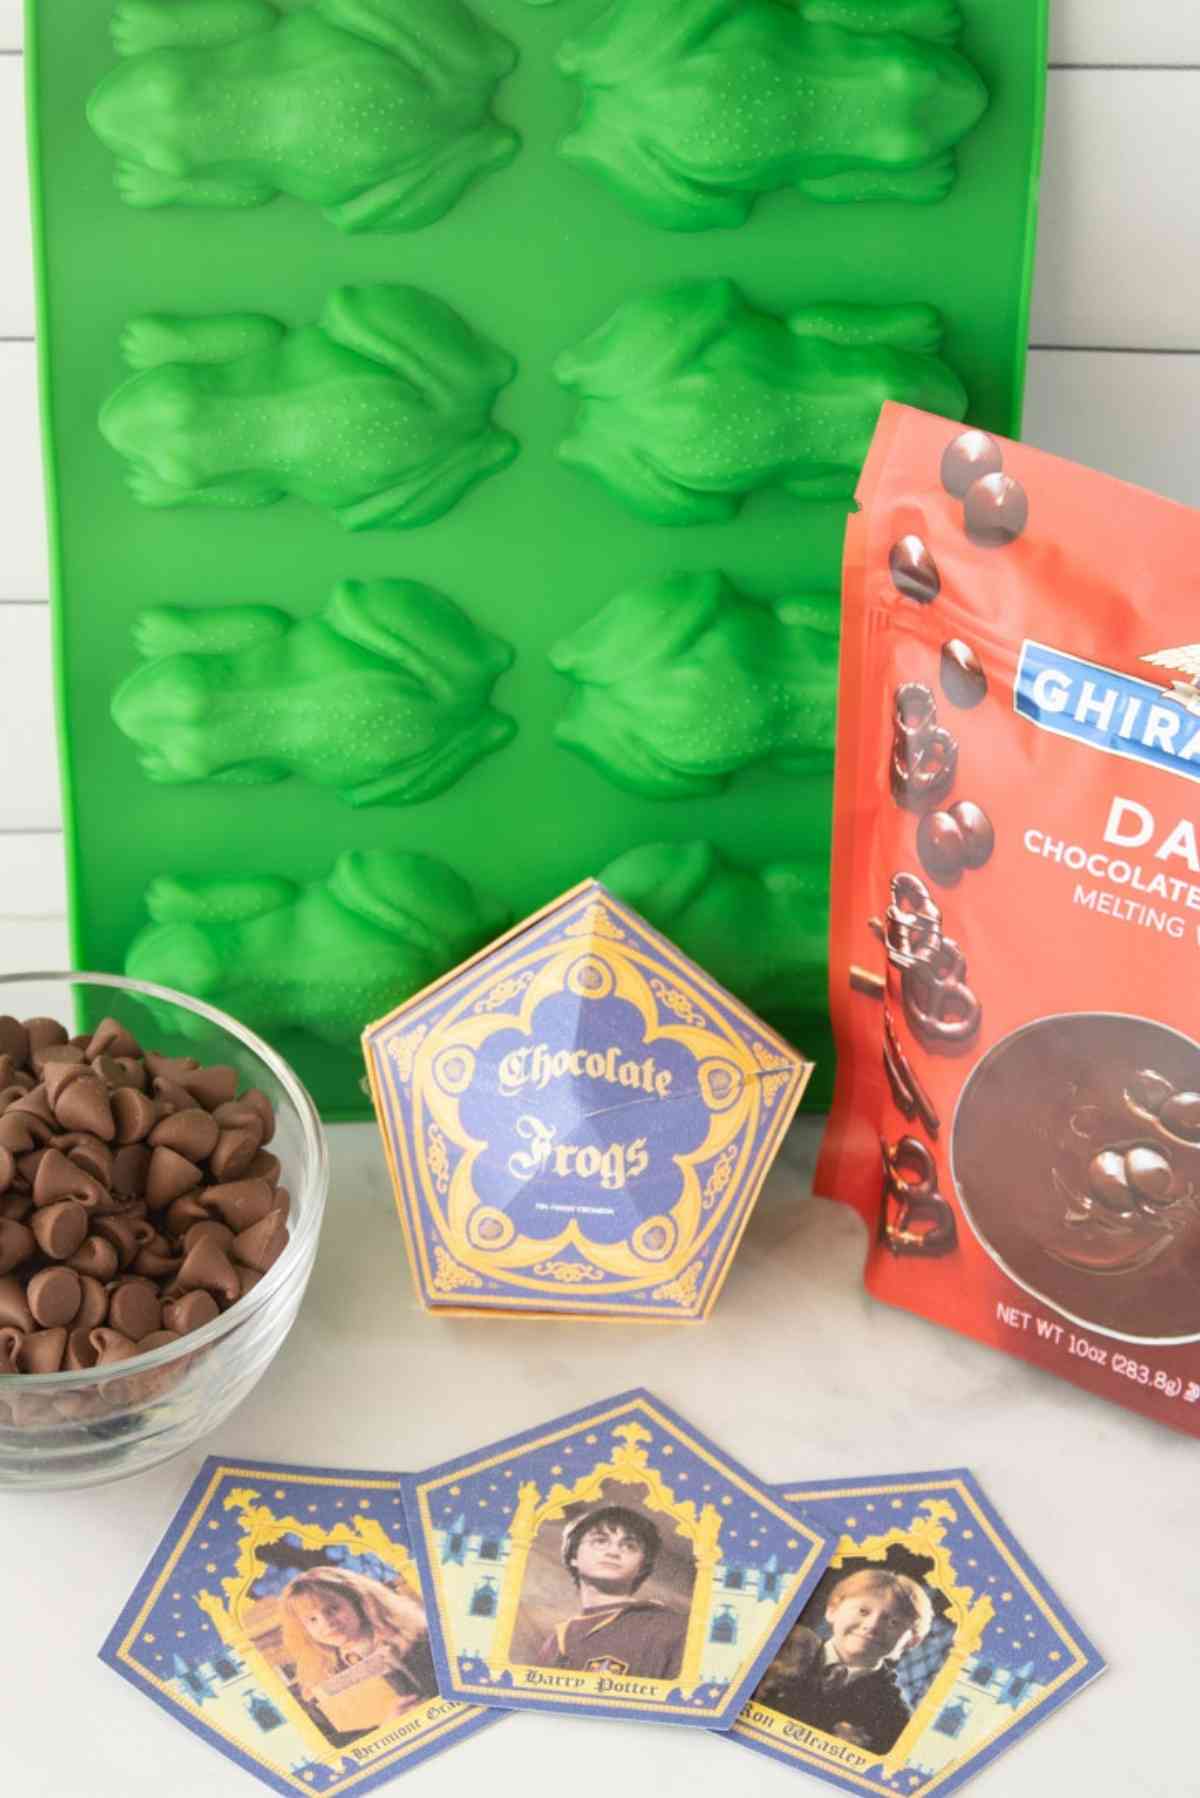 Frog molds, chocolate frog boxes, milk chocolate chips, dark chocolate melting wafers.